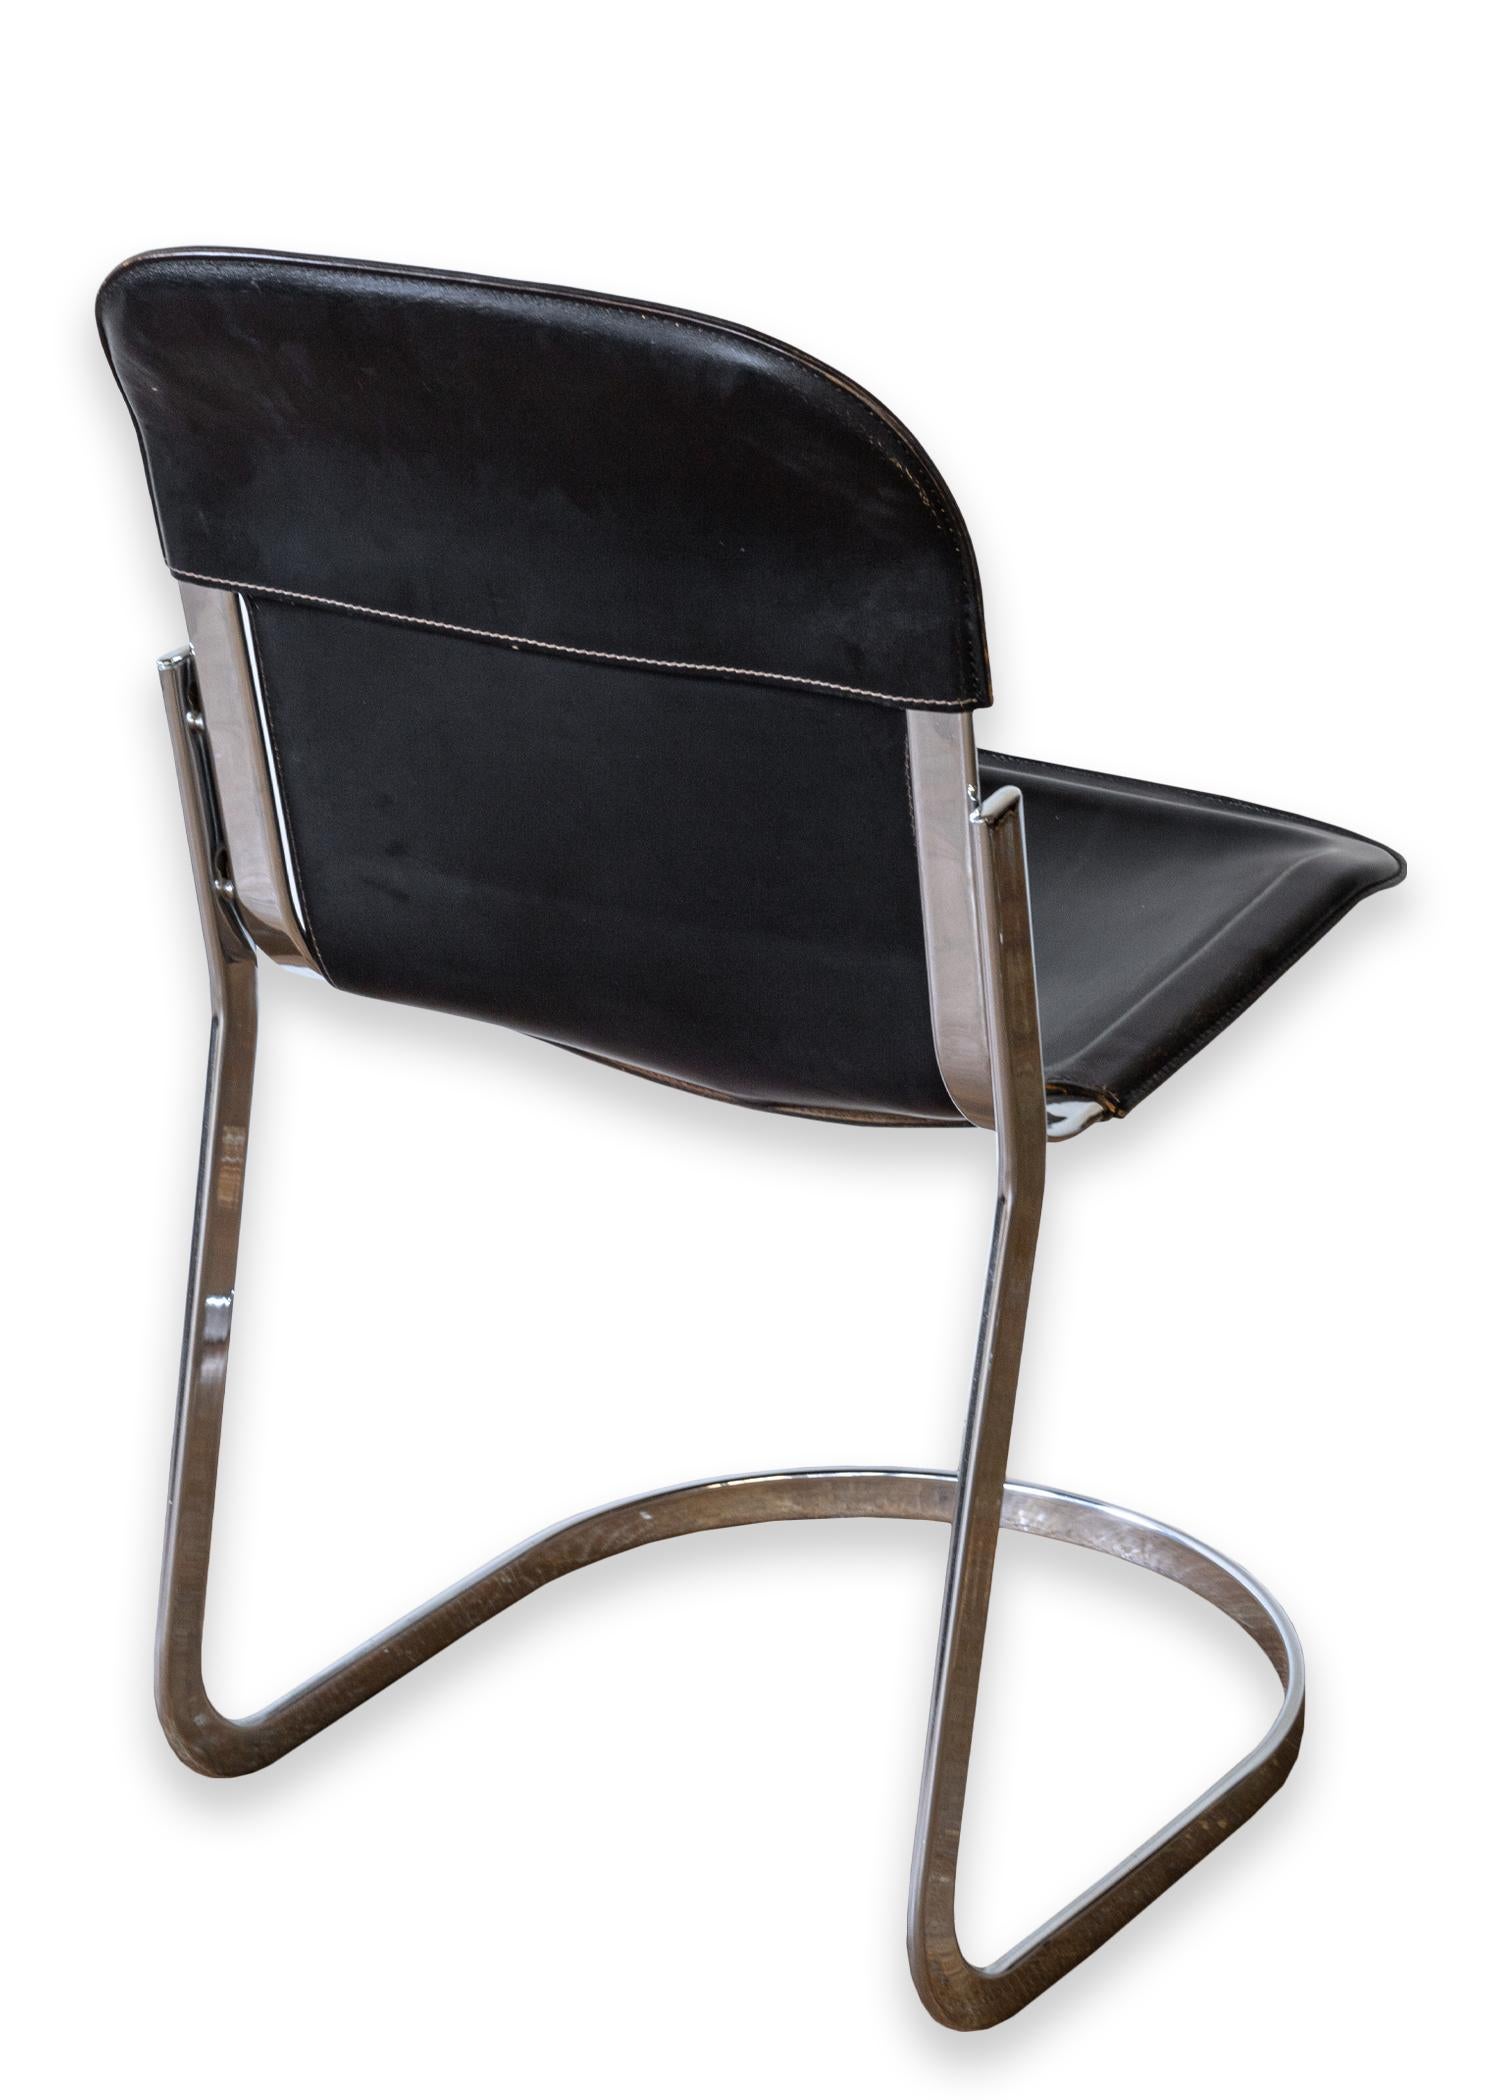 20th Century Set of 4 Black Leather Chrome Cantilever Chairs by Willy Rizzo for Cidue Italy